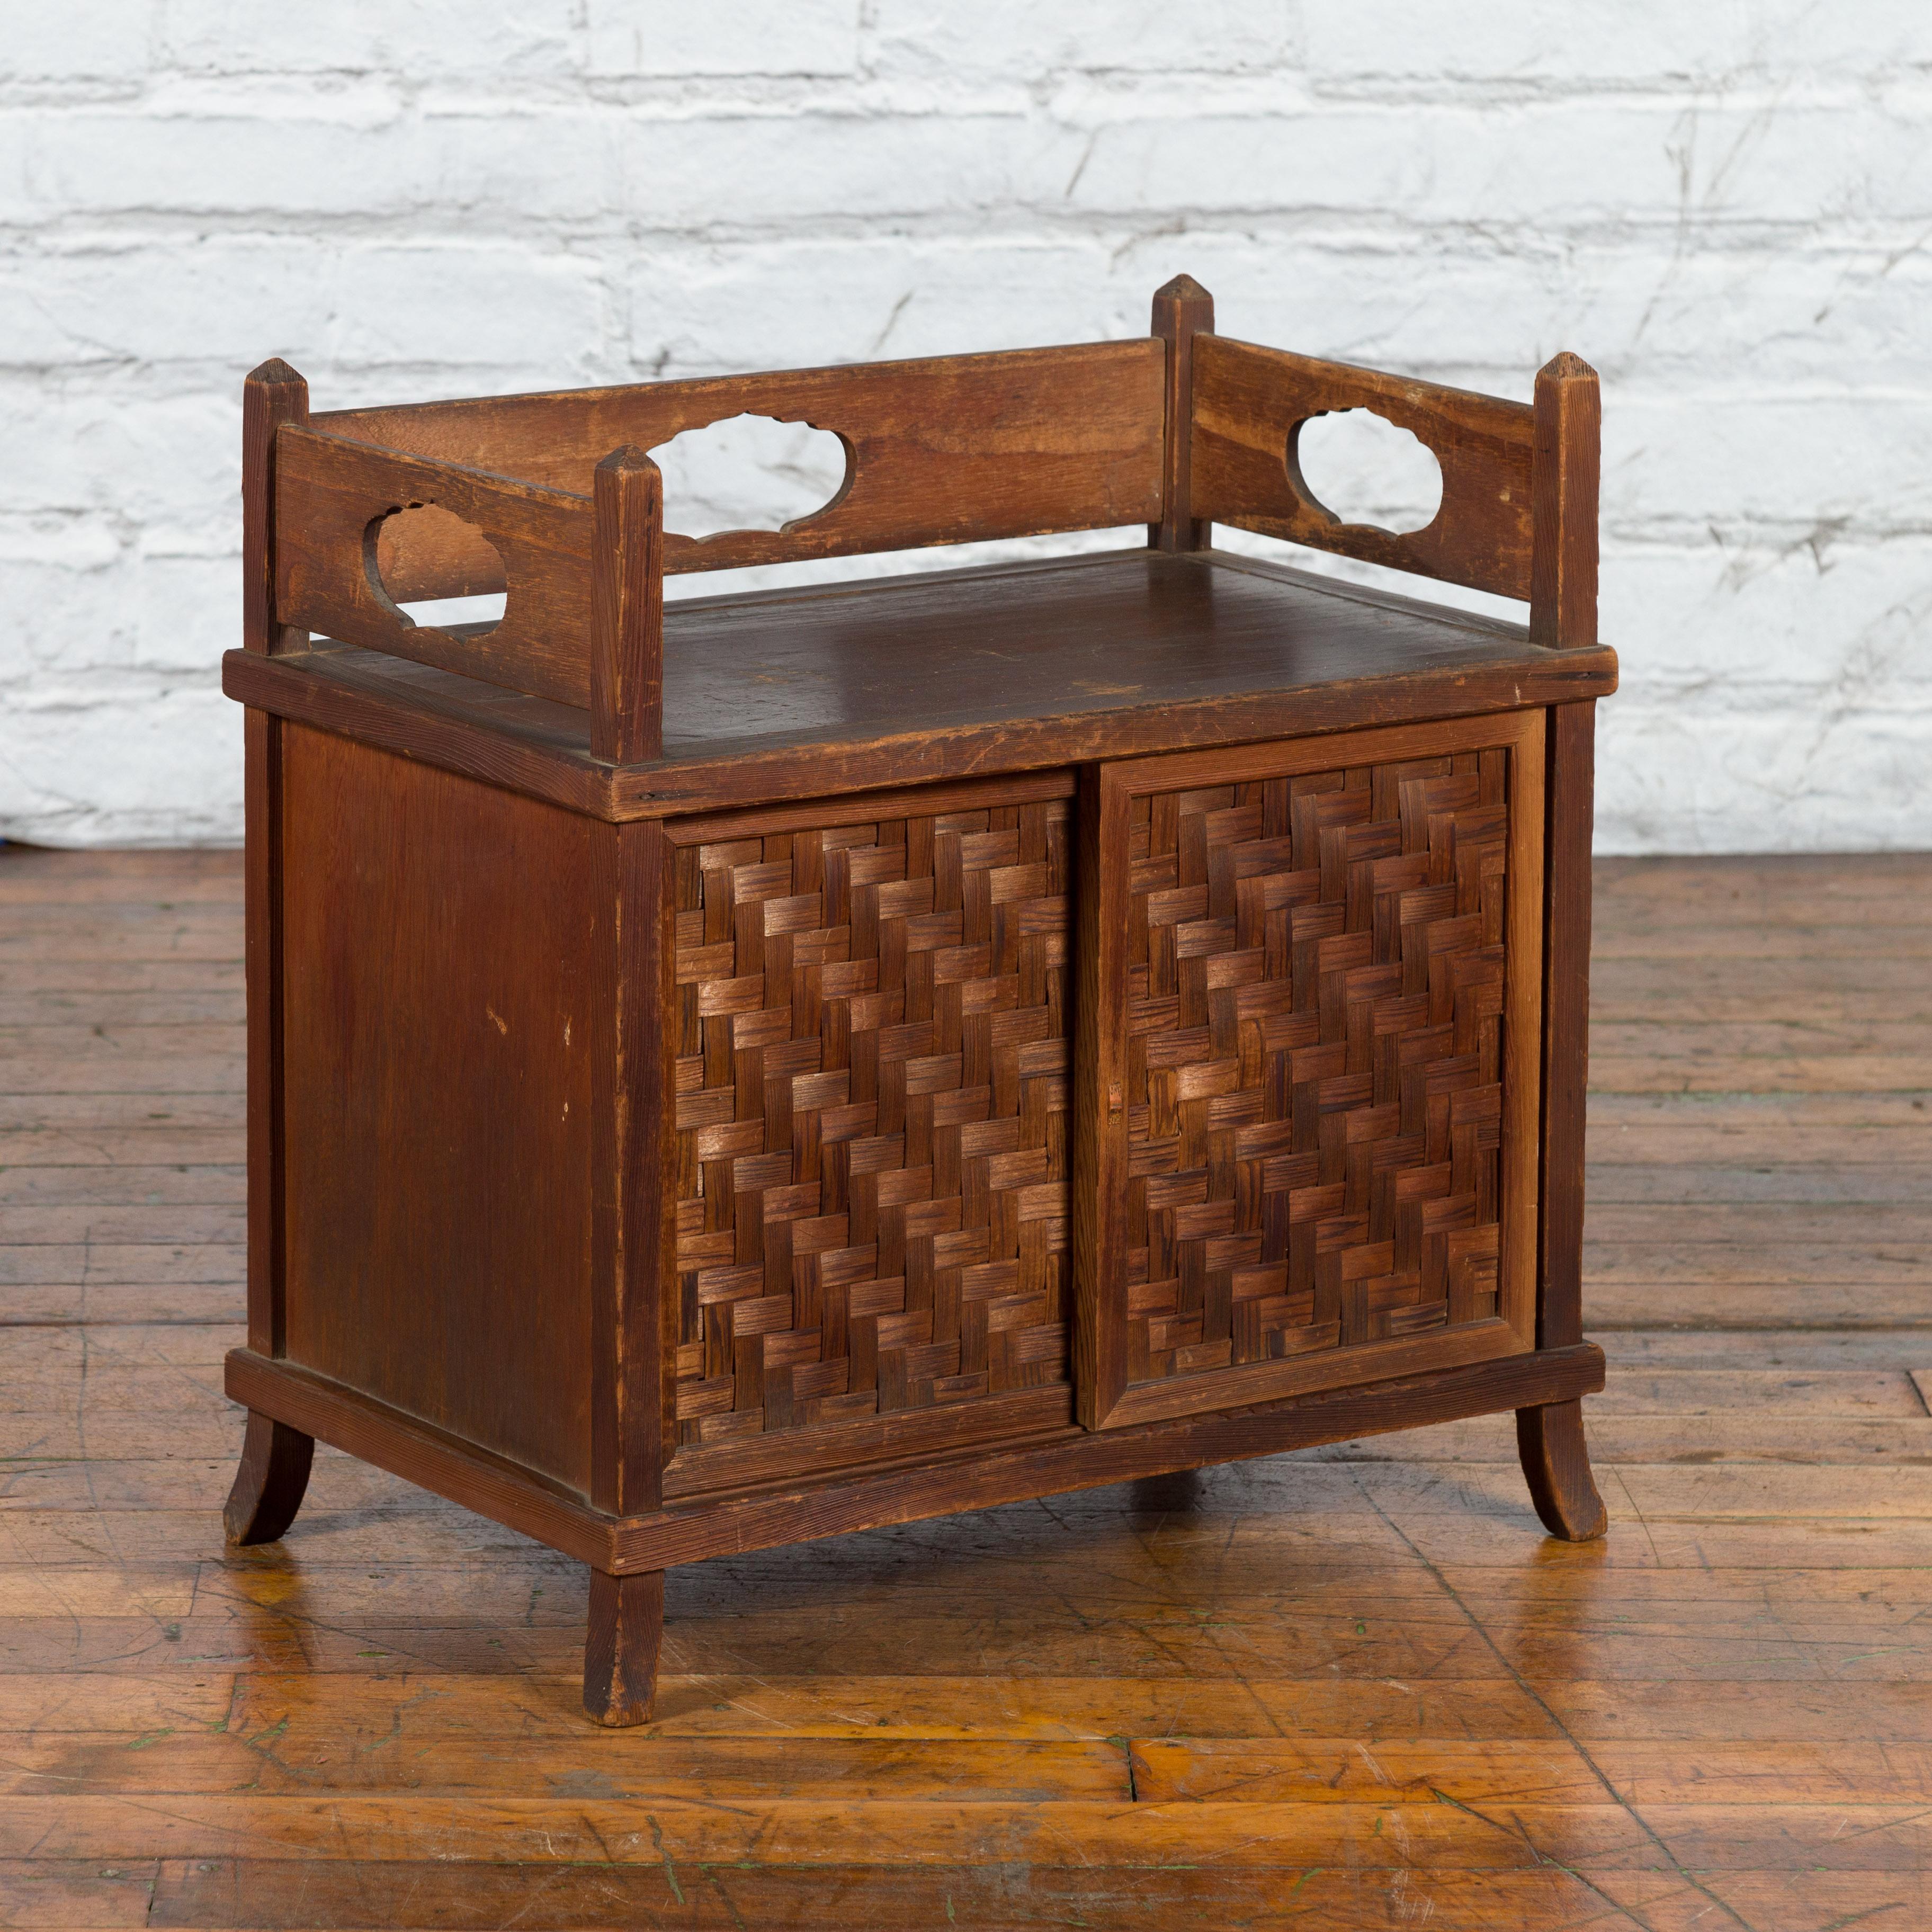 A vintage Javanese wooden side cabinet from the mid 20th century with latticed bamboo sliding doors, three-quarter gallery, pierced motifs and slightly curving feet. Created on the island of Java during the Midcentury period, this side cabinet